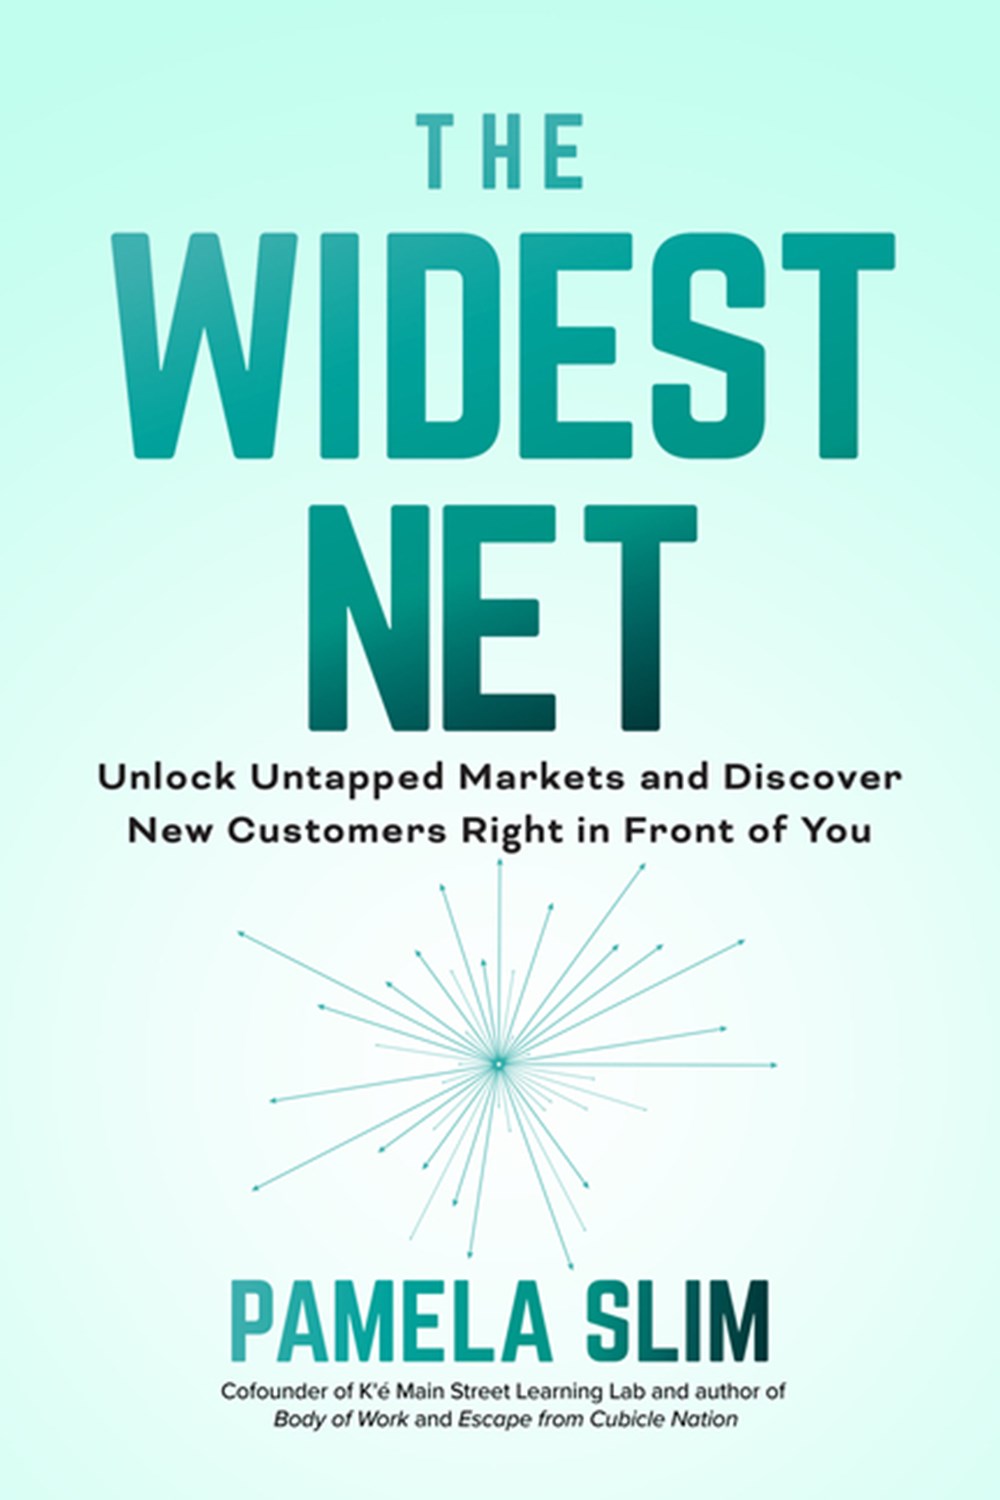 Widest Net Unlock Untapped Markets and Discover New Customers Right in Front of You